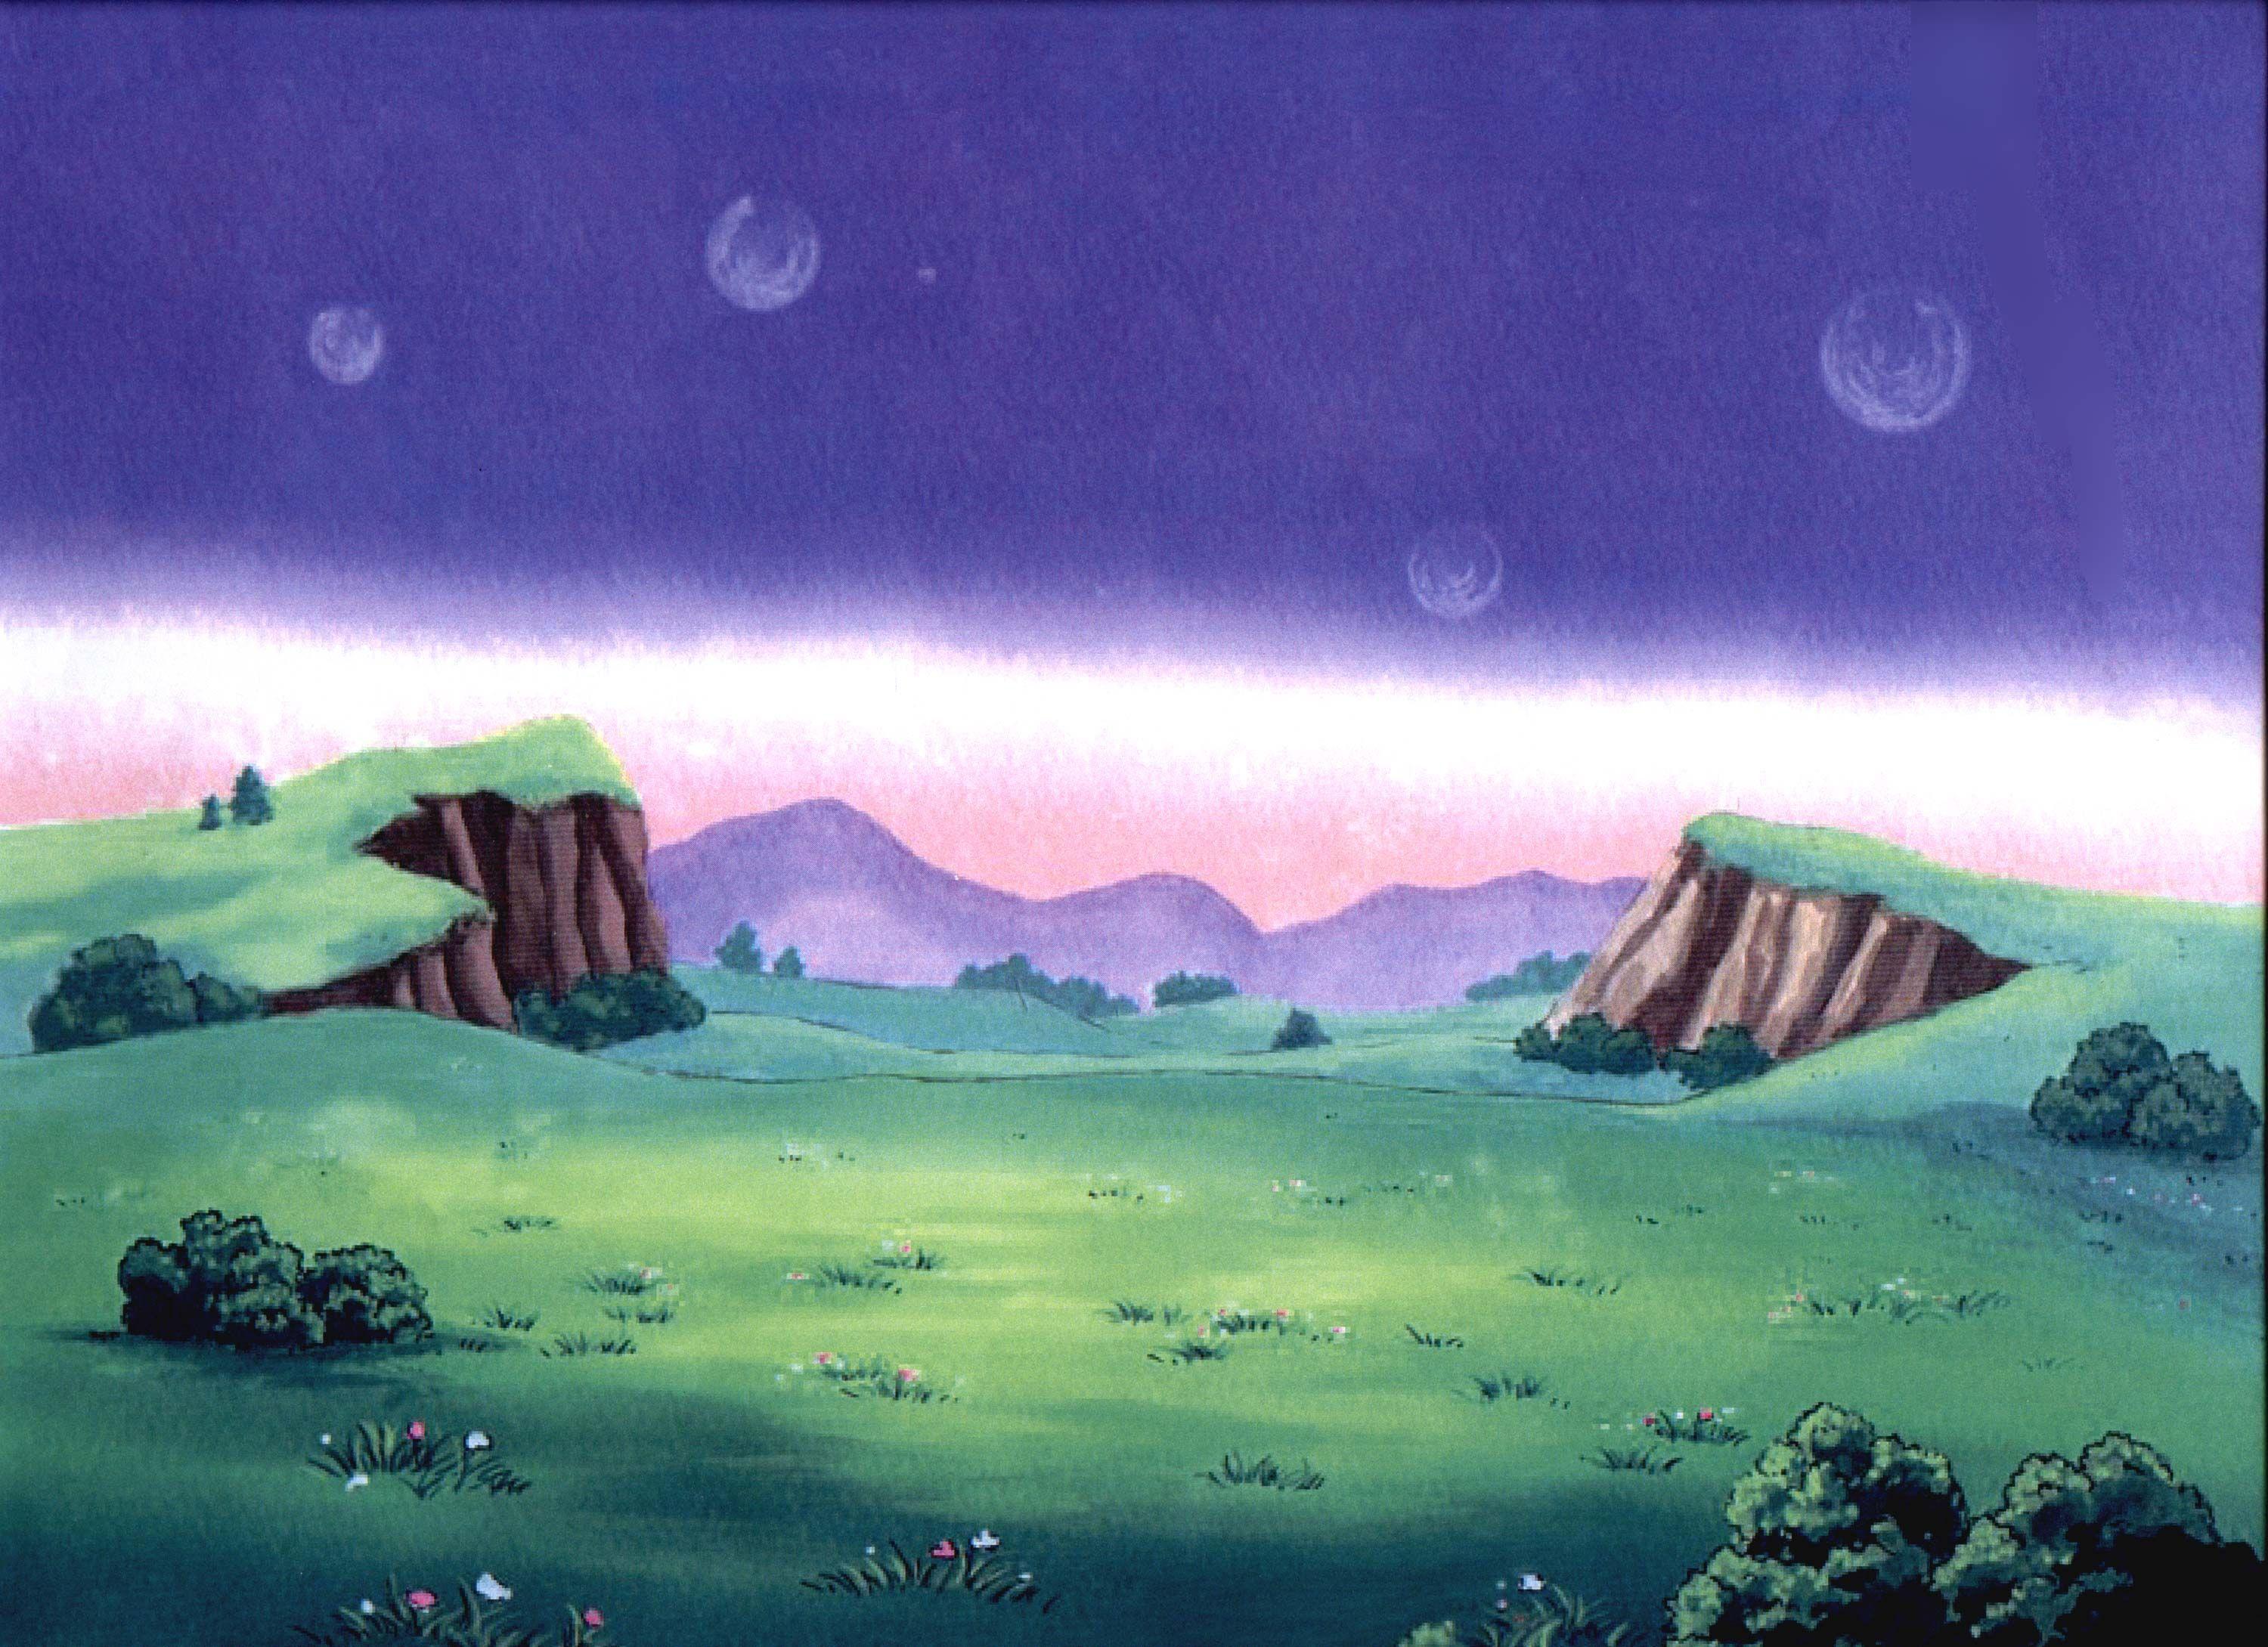 Dragon Ball Super Scenery Wallpapers Top Free Dragon Ball Super Scenery Backgrounds Wallpaperaccess